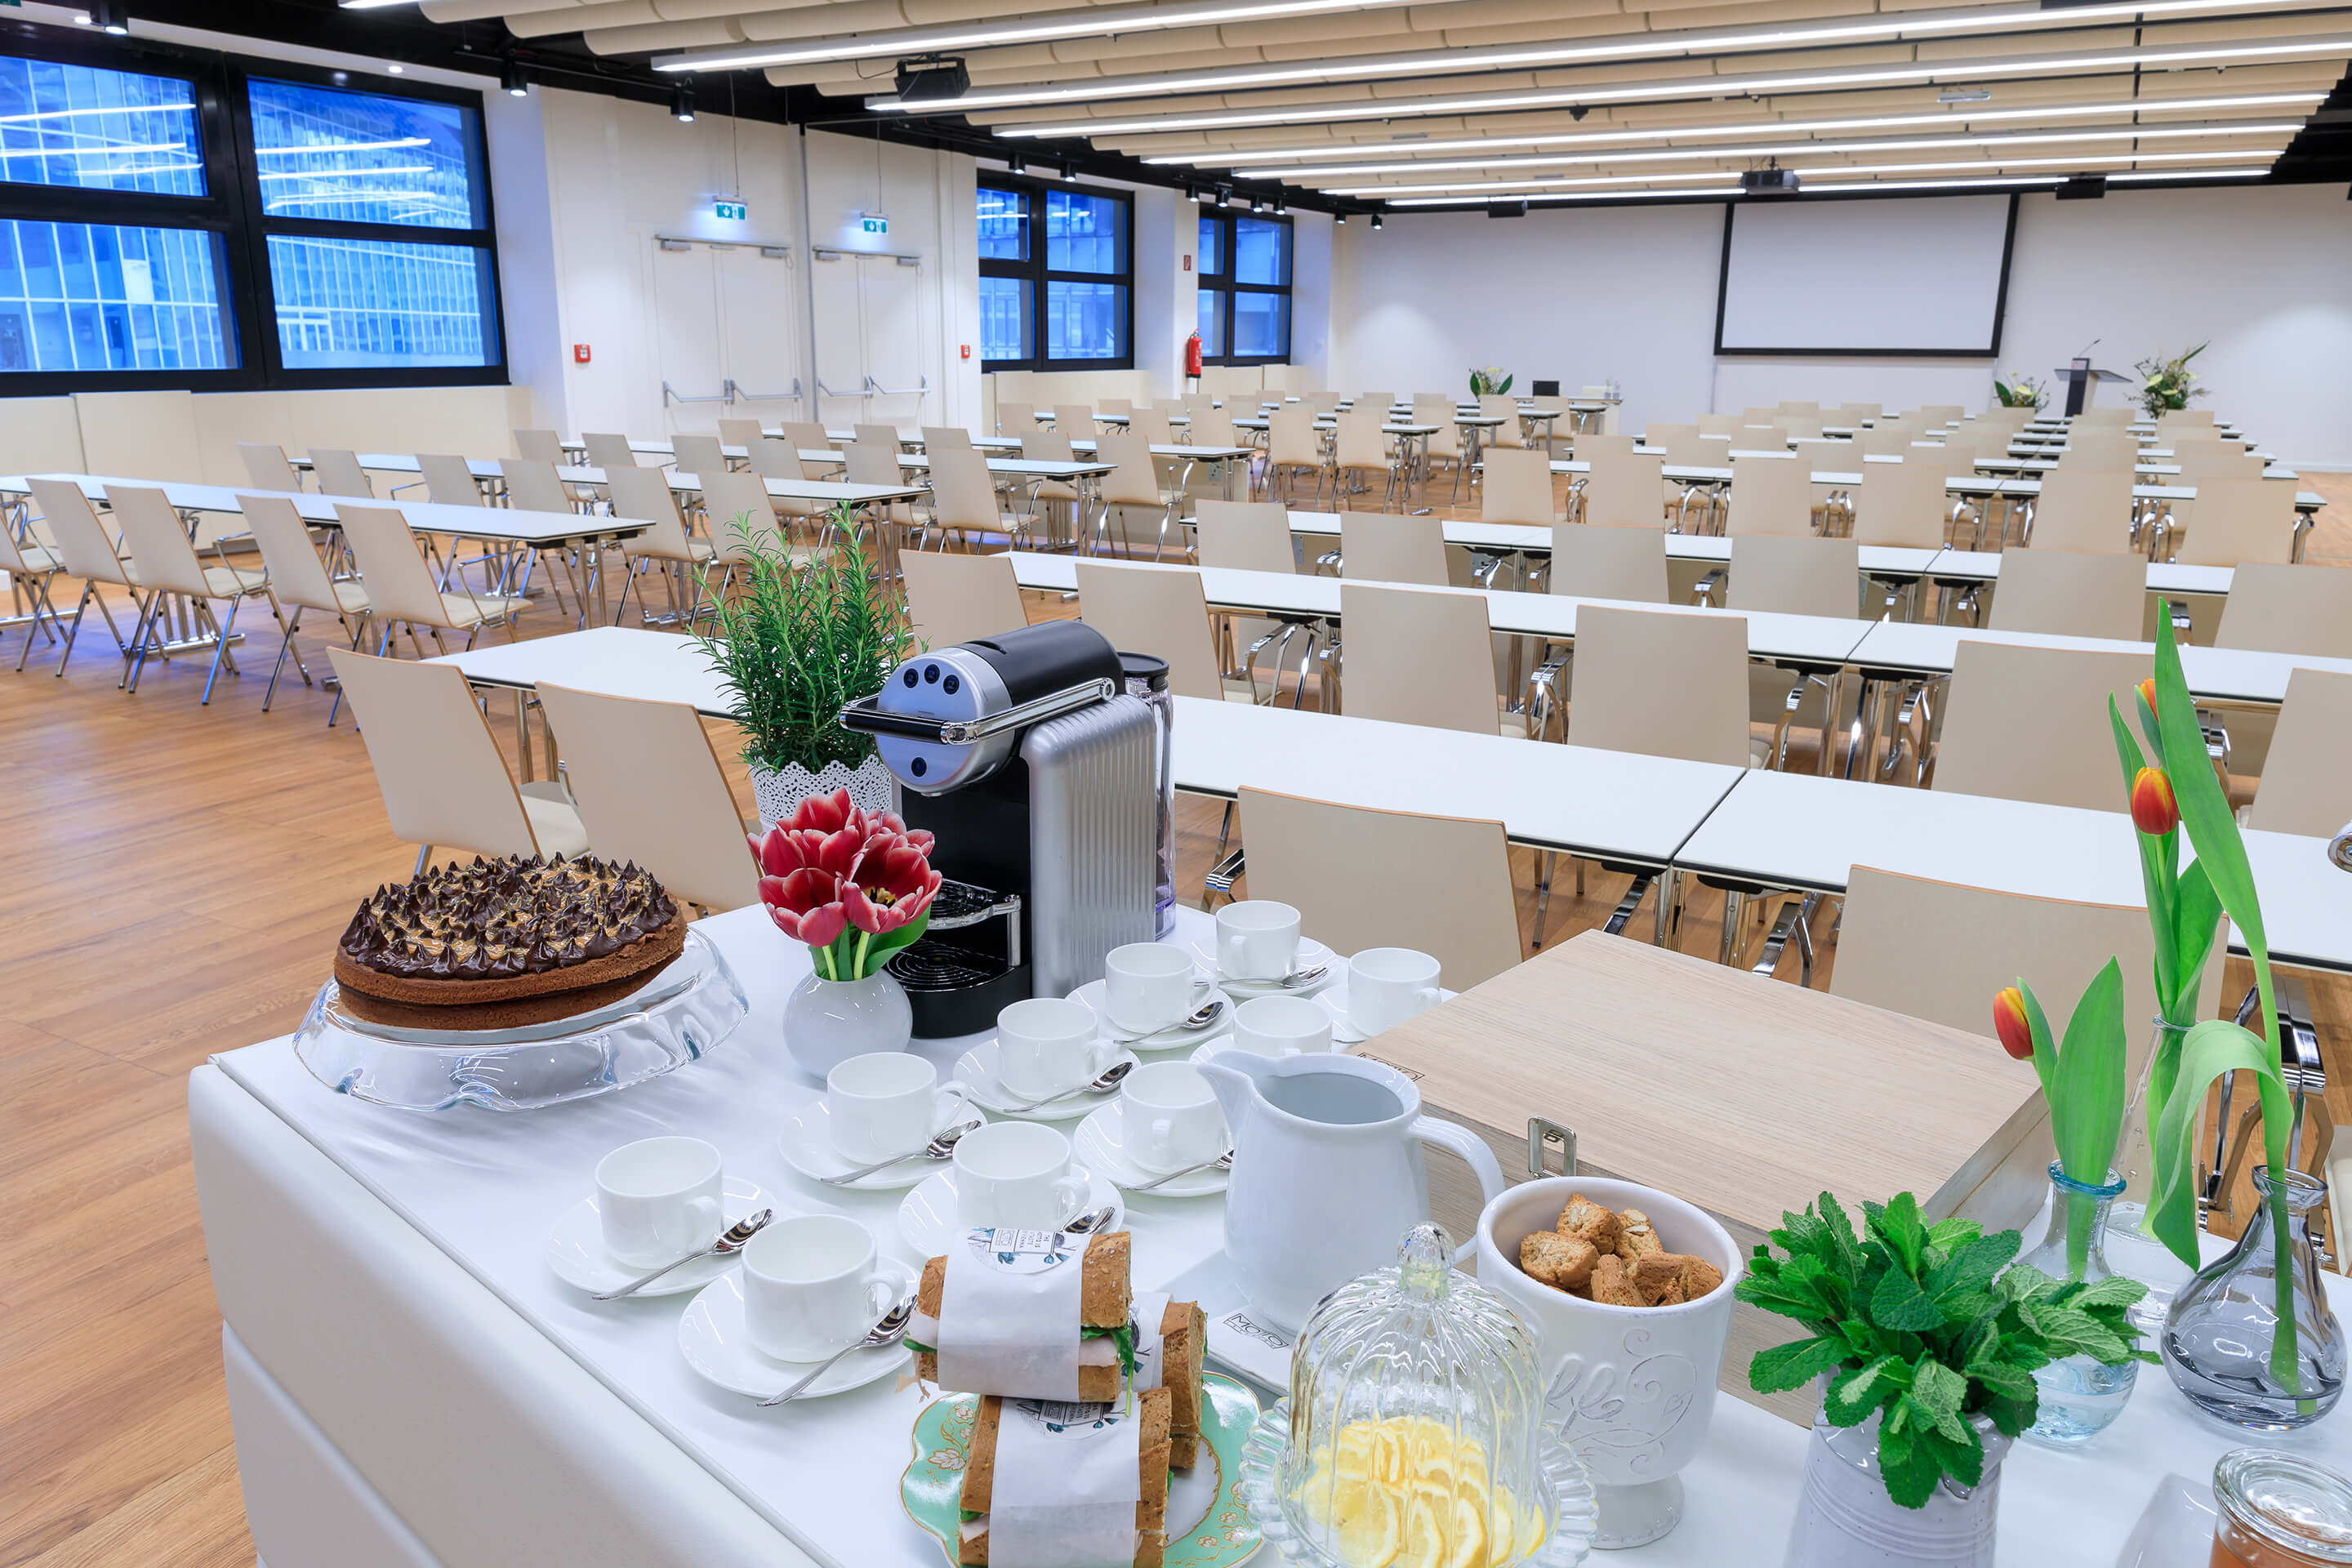 Foto: Haus Level 1 Saal N Setting Tagung mit Motto Catering